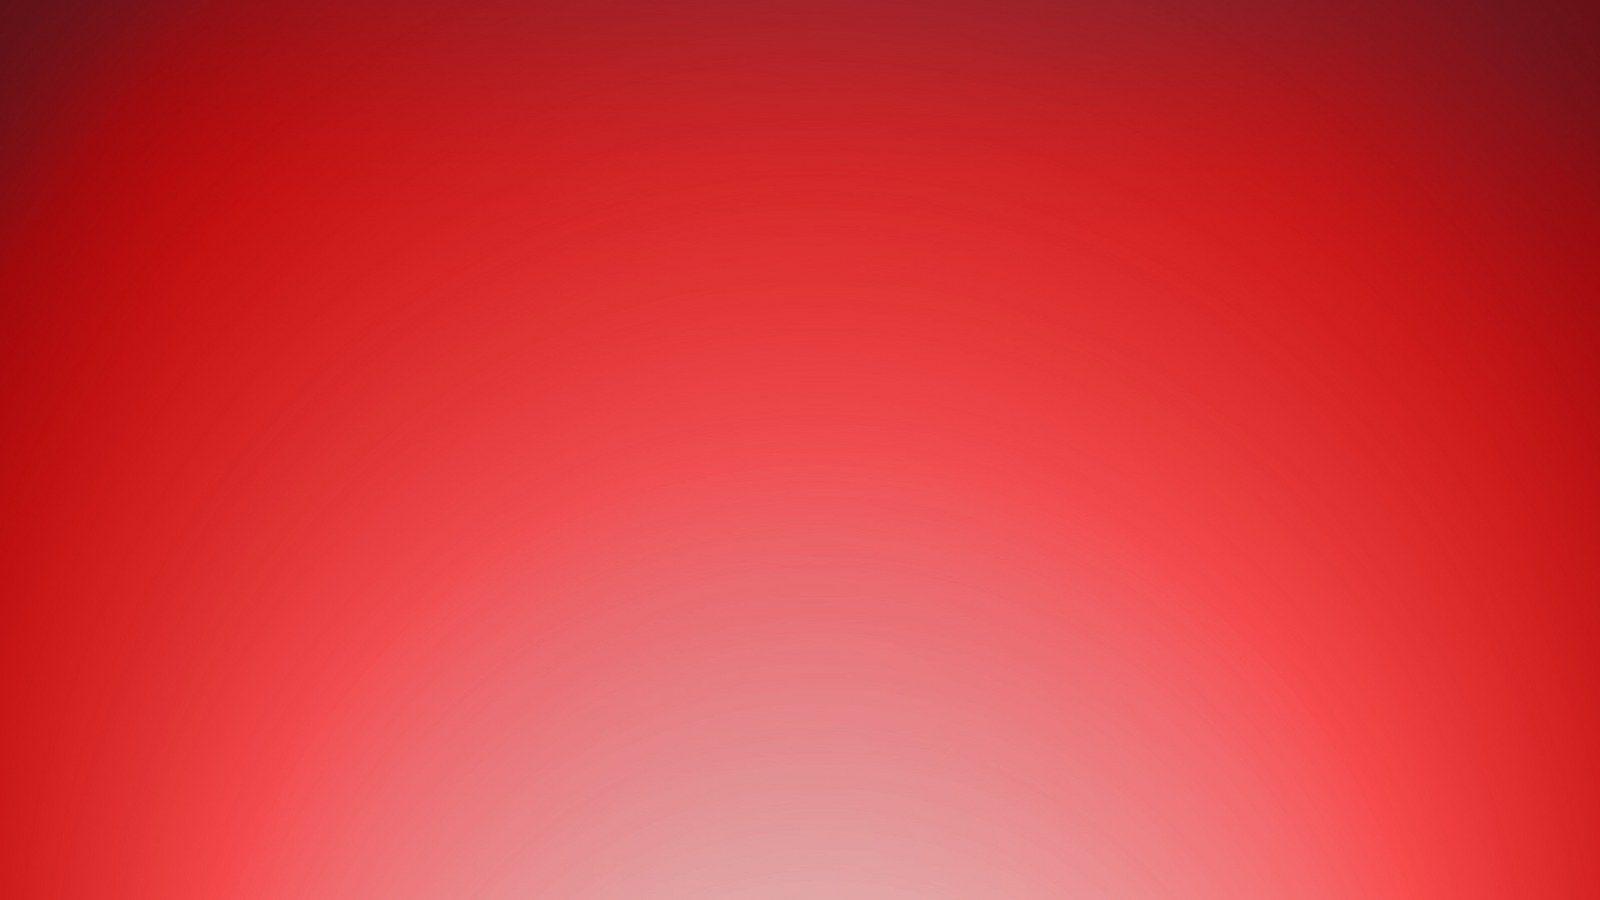 Red Background Texture Free Downloads Wallpaper. Cool